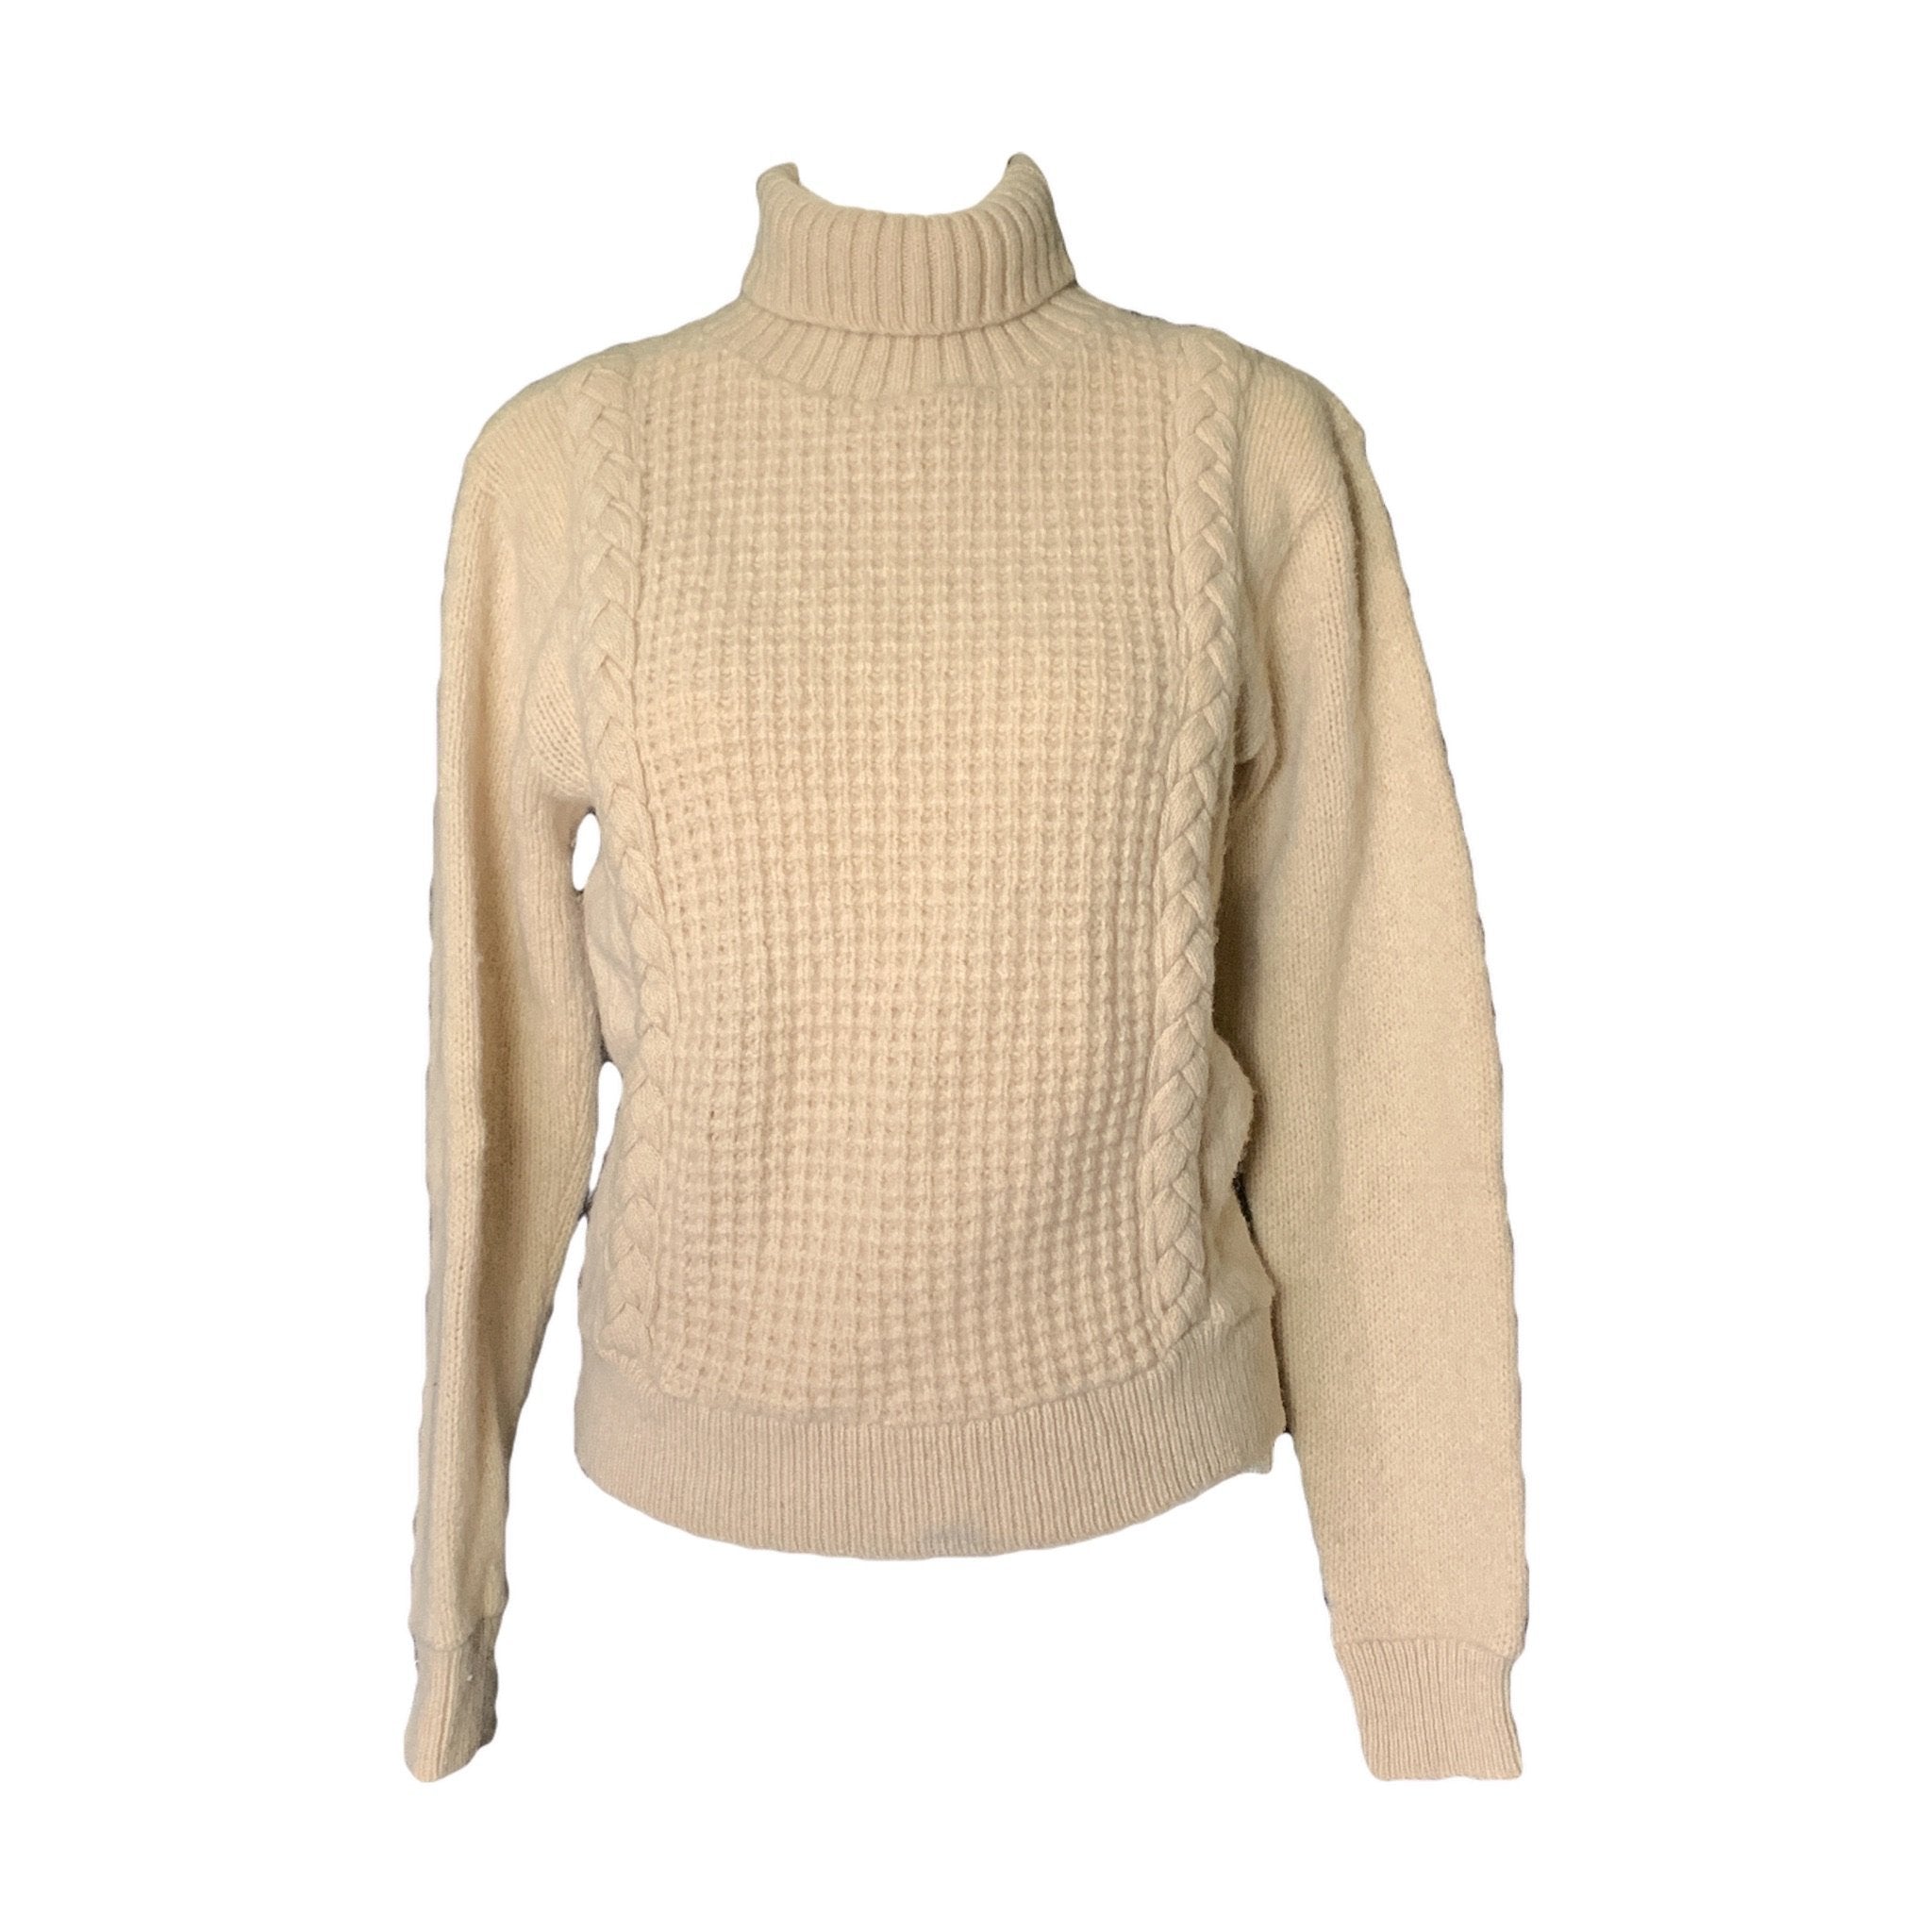 Vintage 1960s Chunky Cream Cable Knit Wool Sweater. Sustainable Fashio